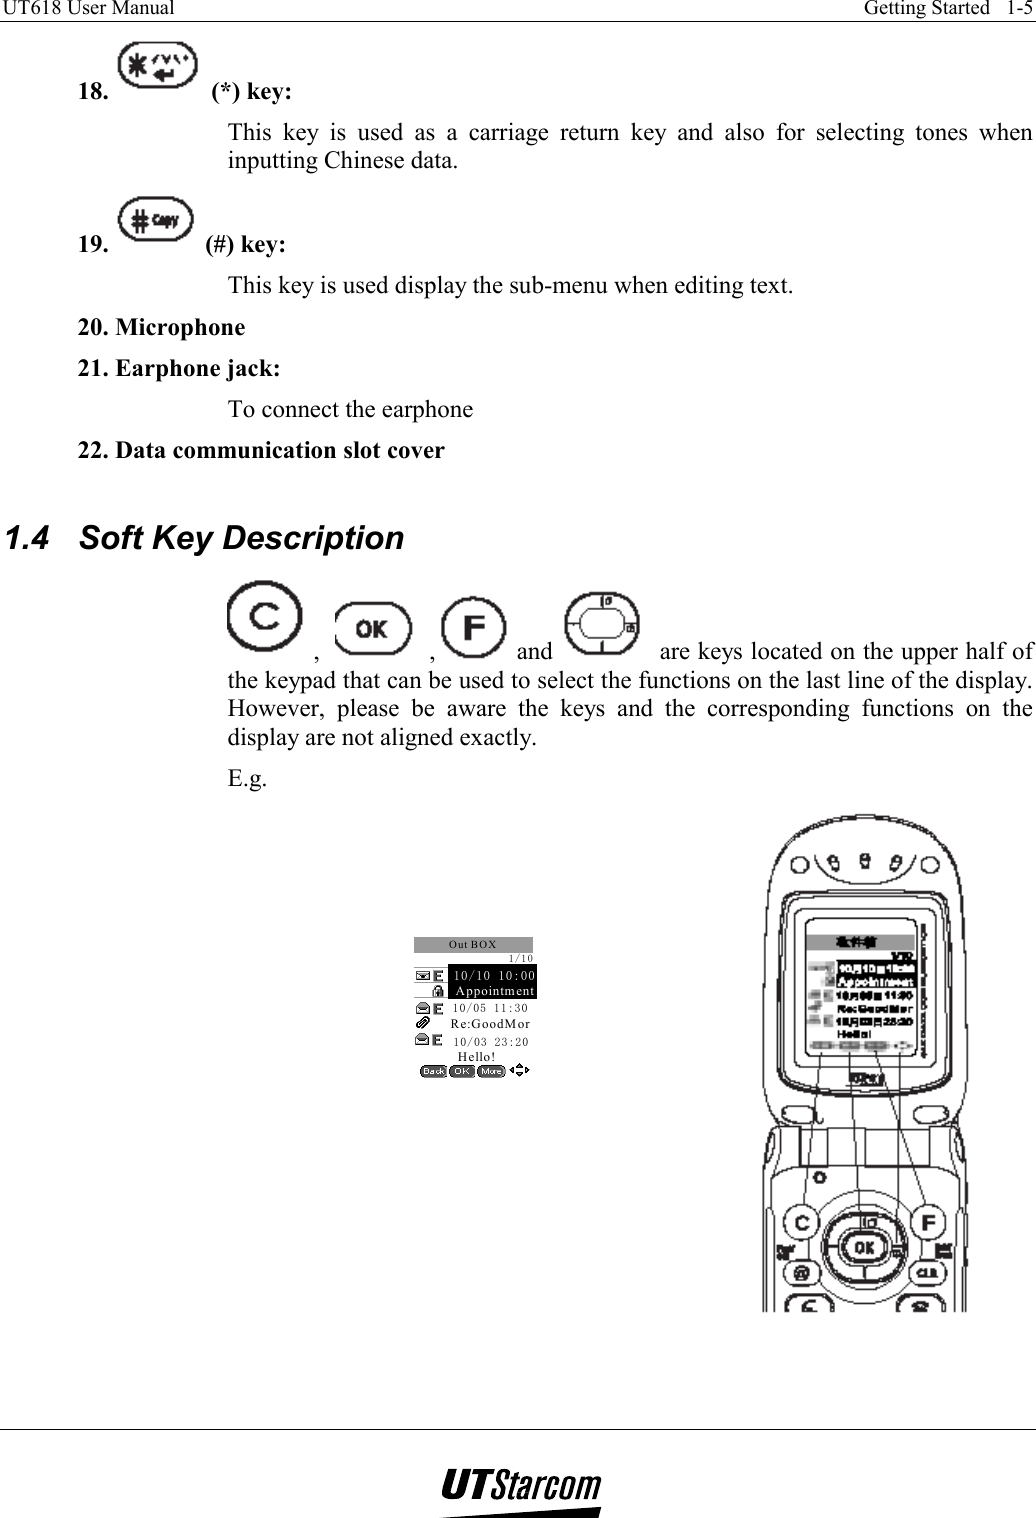 UT618 User Manual    Getting Started   1-5   18.   (*) key:  This key is used as a carriage return key and also for selecting tones when inputting Chinese data. 19.   (#) key:  This key is used display the sub-menu when editing text. 20. Microphone 21. Earphone jack:  To connect the earphone 22. Data communication slot cover  1.4  Soft Key Description  ,     ,  and   are keys located on the upper half of the keypad that can be used to select the functions on the last line of the display. However, please be aware the keys and the corresponding functions on the display are not aligned exactly. E.g.       10/03 23:20    Re:GoodMorOut BOX    Hello!1/10Appointment    10/10 10:00    10/05 11:30